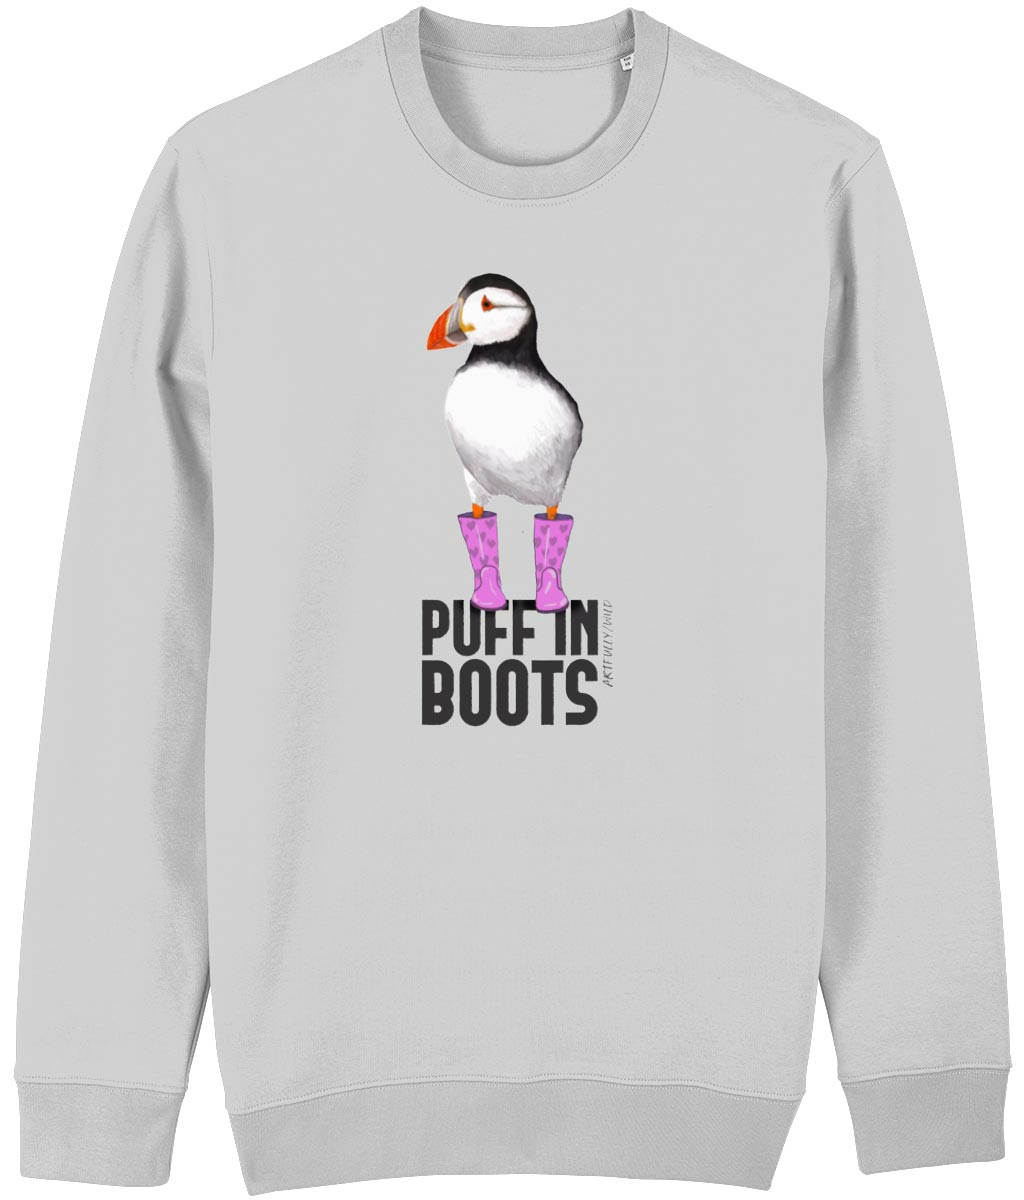 PUFF IN PINK BOOTS Organic Cotton Grey Marl Unisex Crew Neck Sweatshirt. Printed with eco-friendly water-based Inks. Original Design by Artfully Wild.